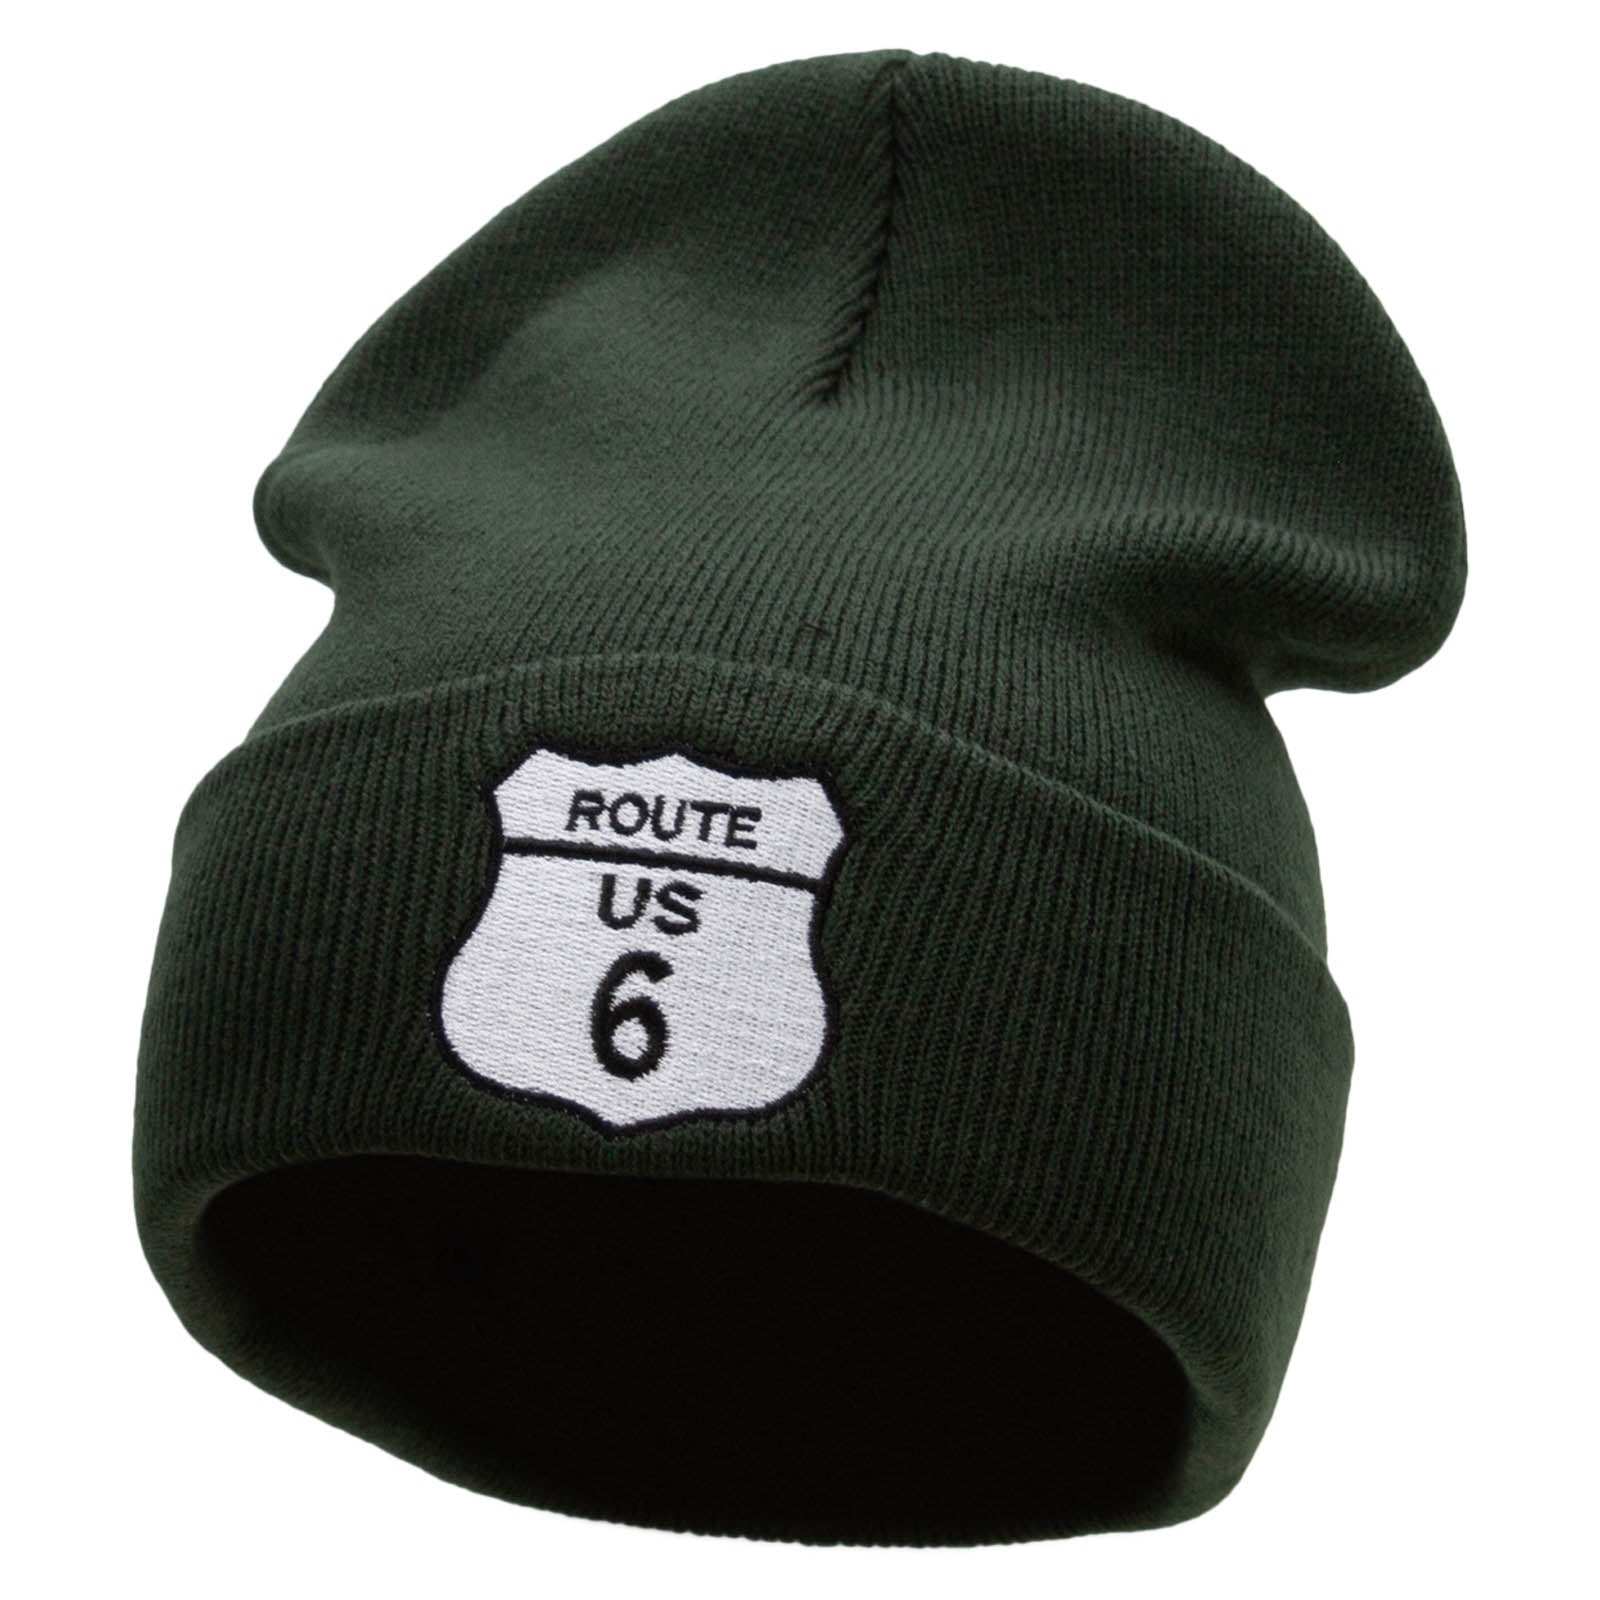 Route US 6 Embroidered 12 Inch Long Knitted Beanie - Navy OSFM